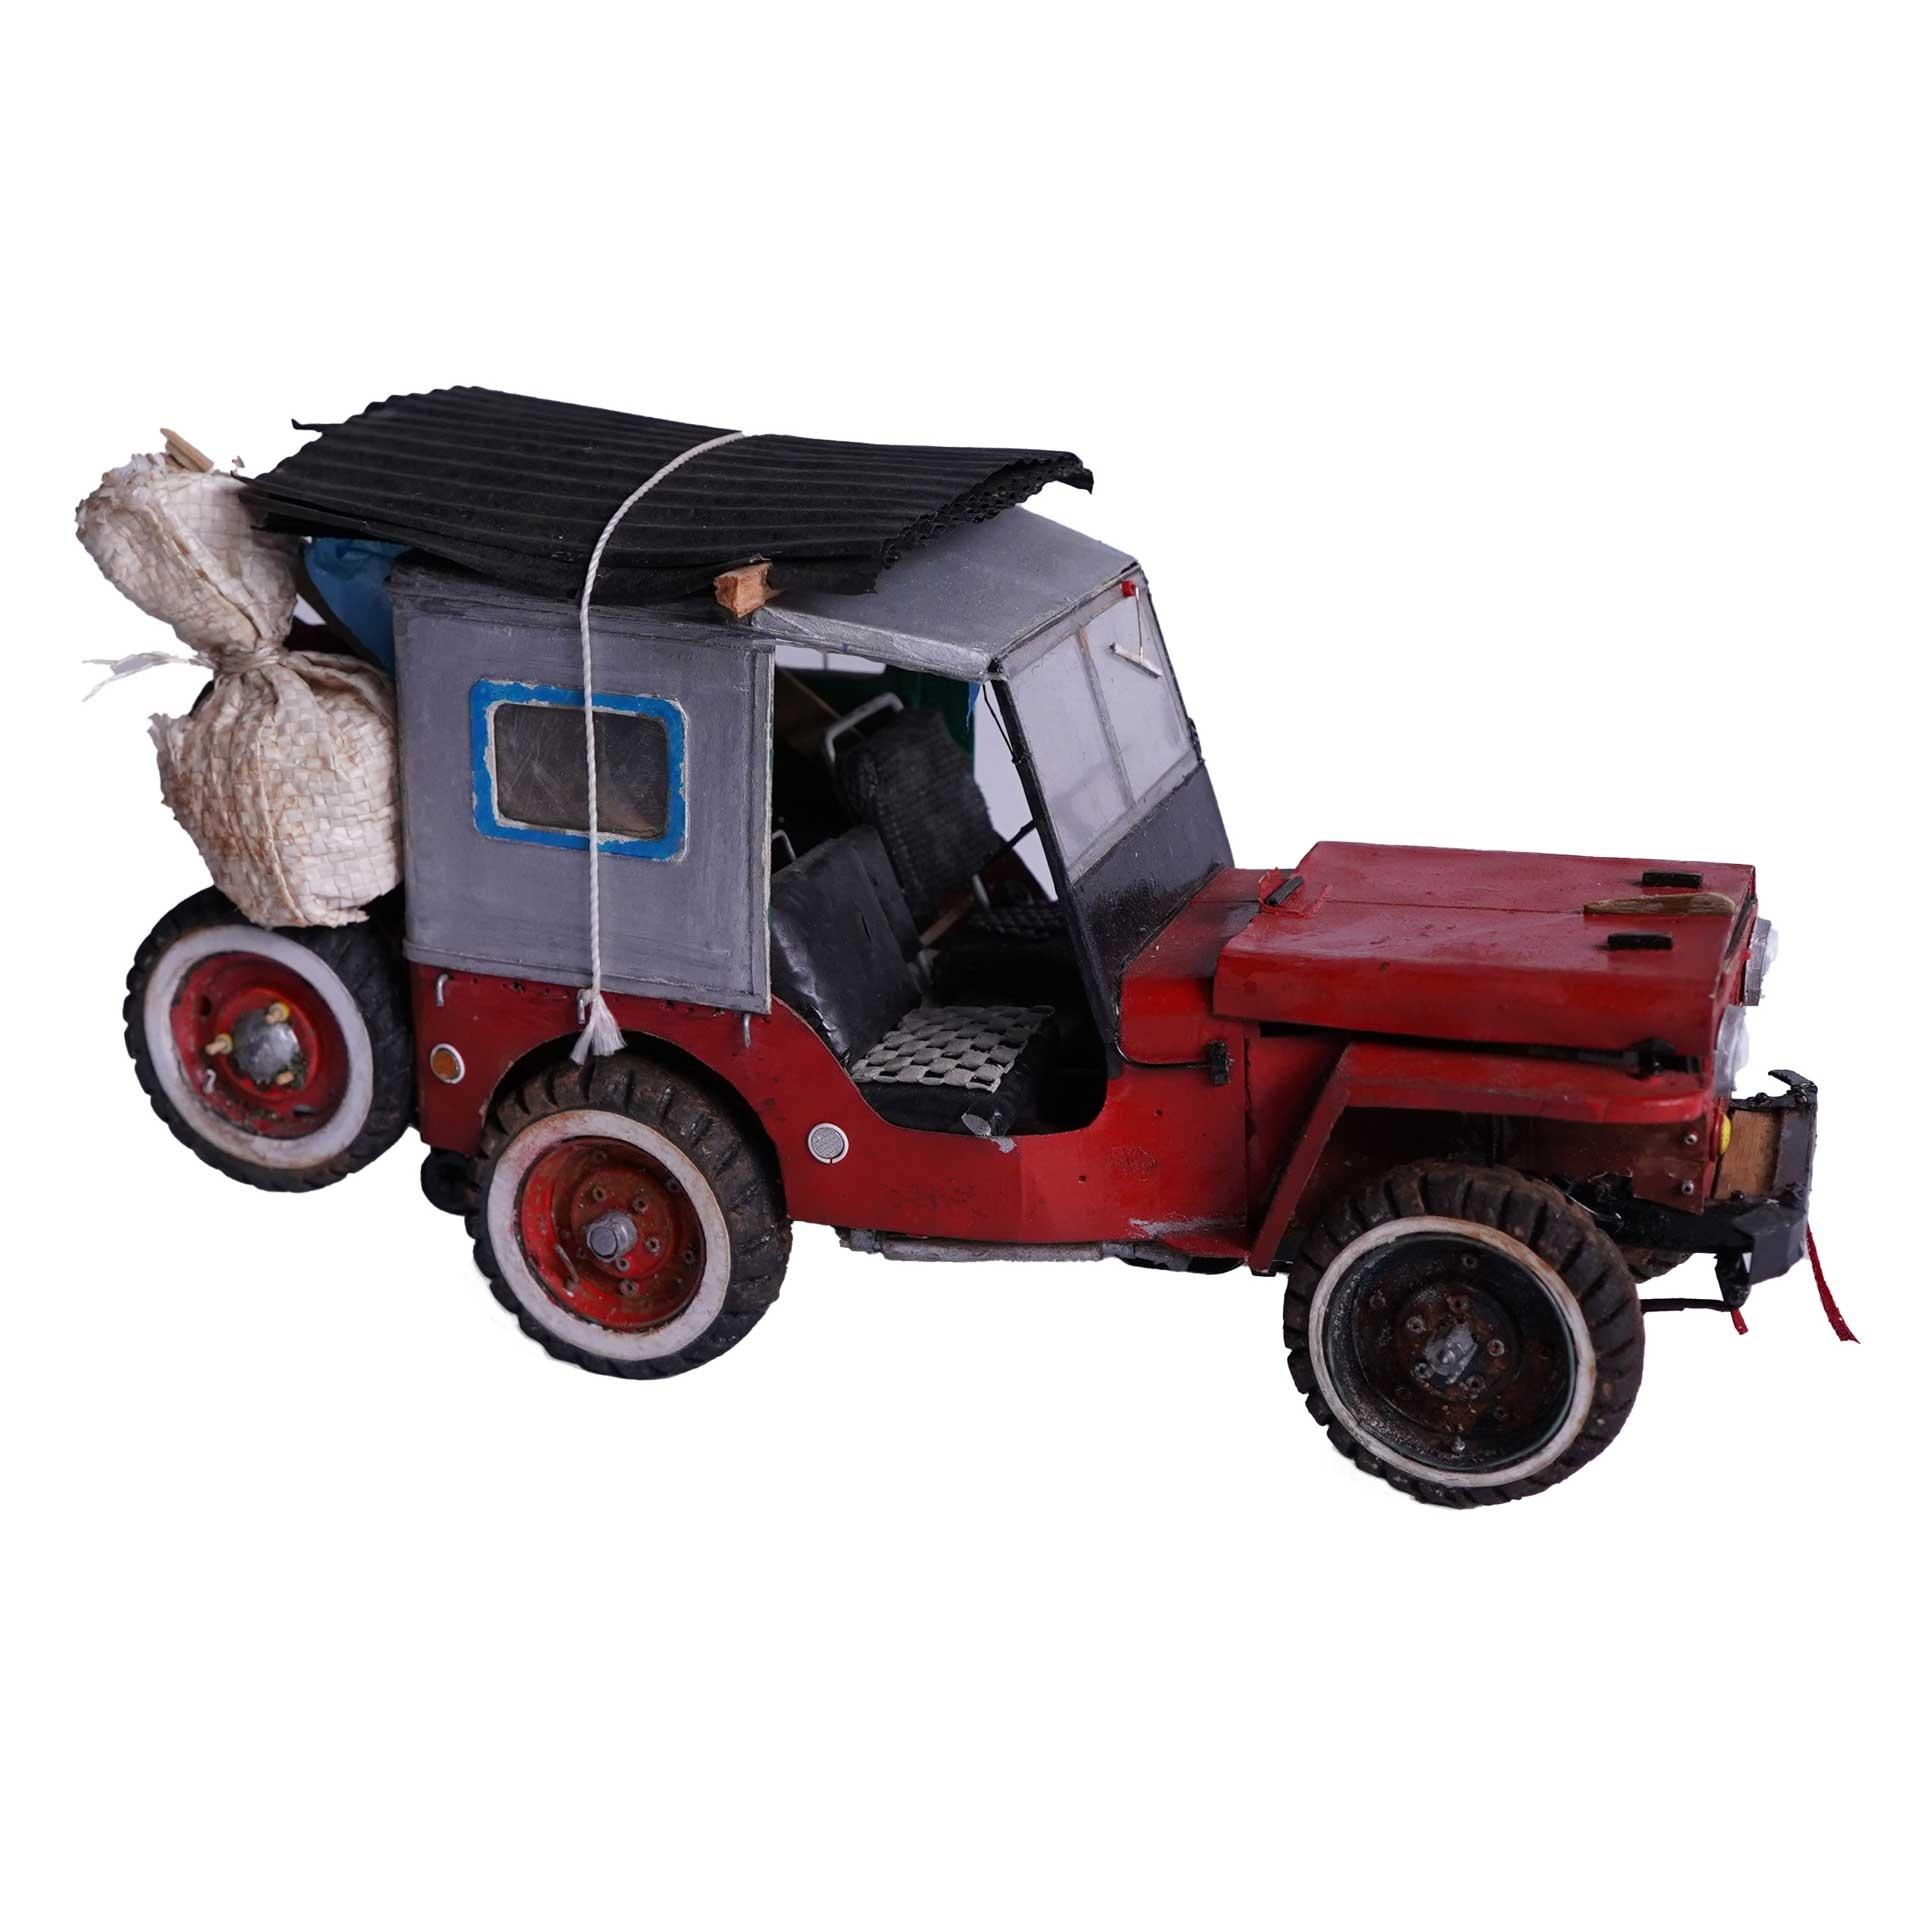 Leandro Gomez Quintero, small scale model of a red Willys Jeep with sacks in the back and roofing material on the top of the vehicle strapped down